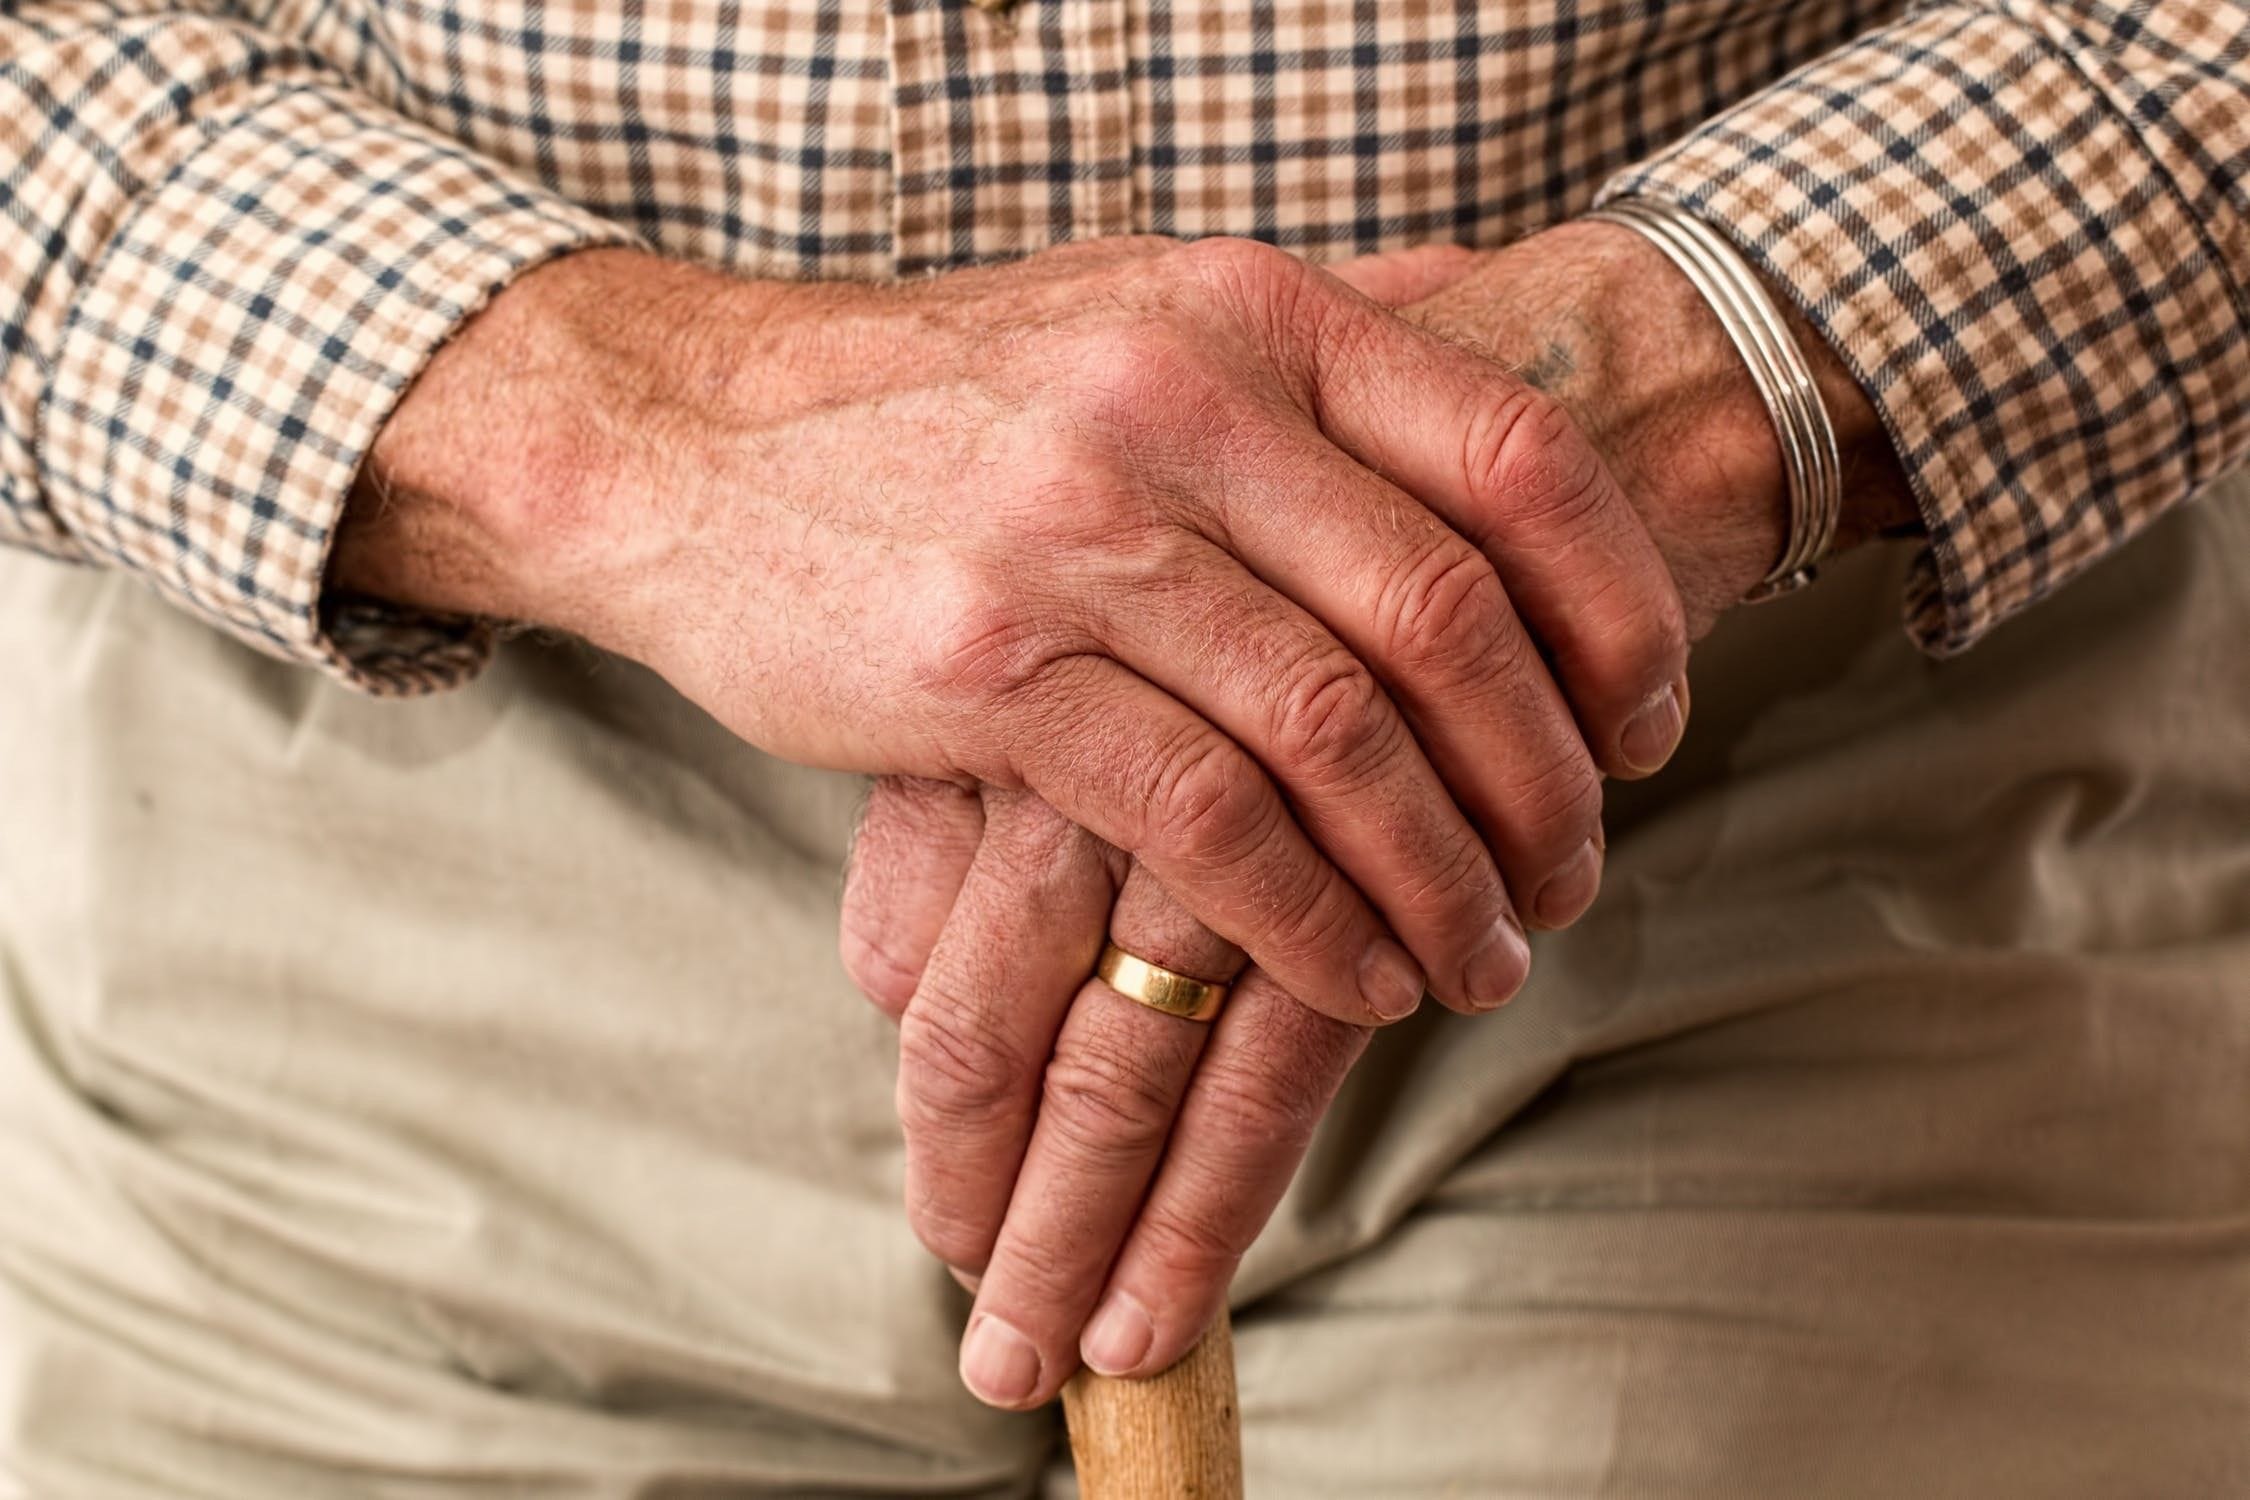 New Research Identifies Individuals Twice as Likely to Develop Parkinson’s